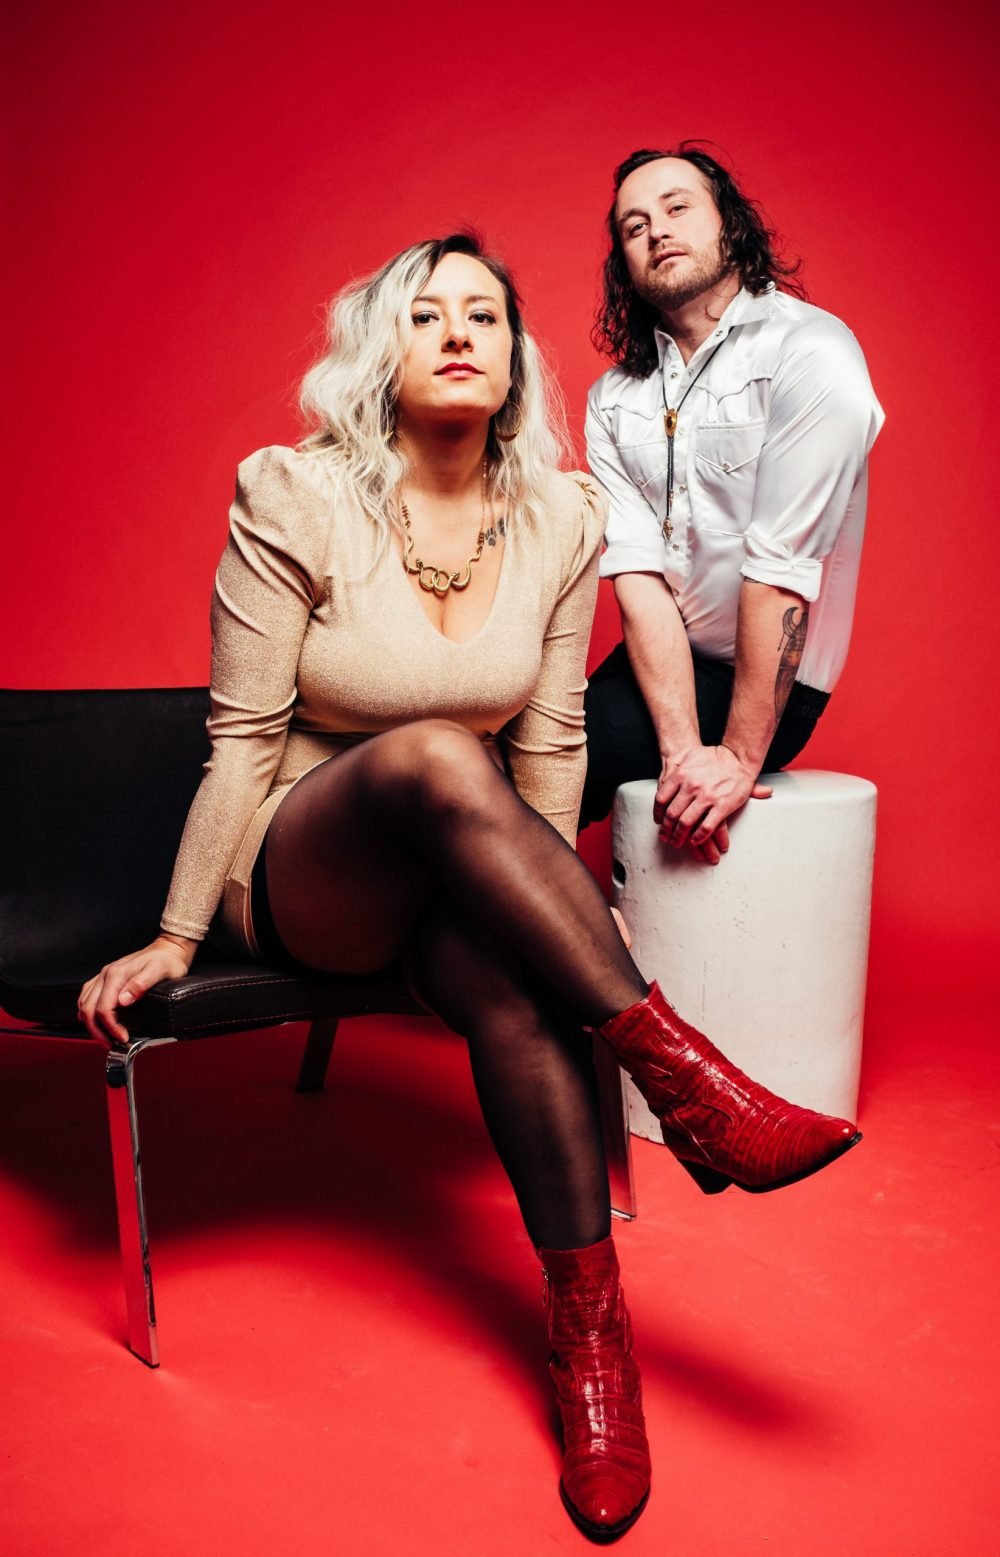 Miesha & The Spanks – “Mixed Blood Girls” – Next Single Due For